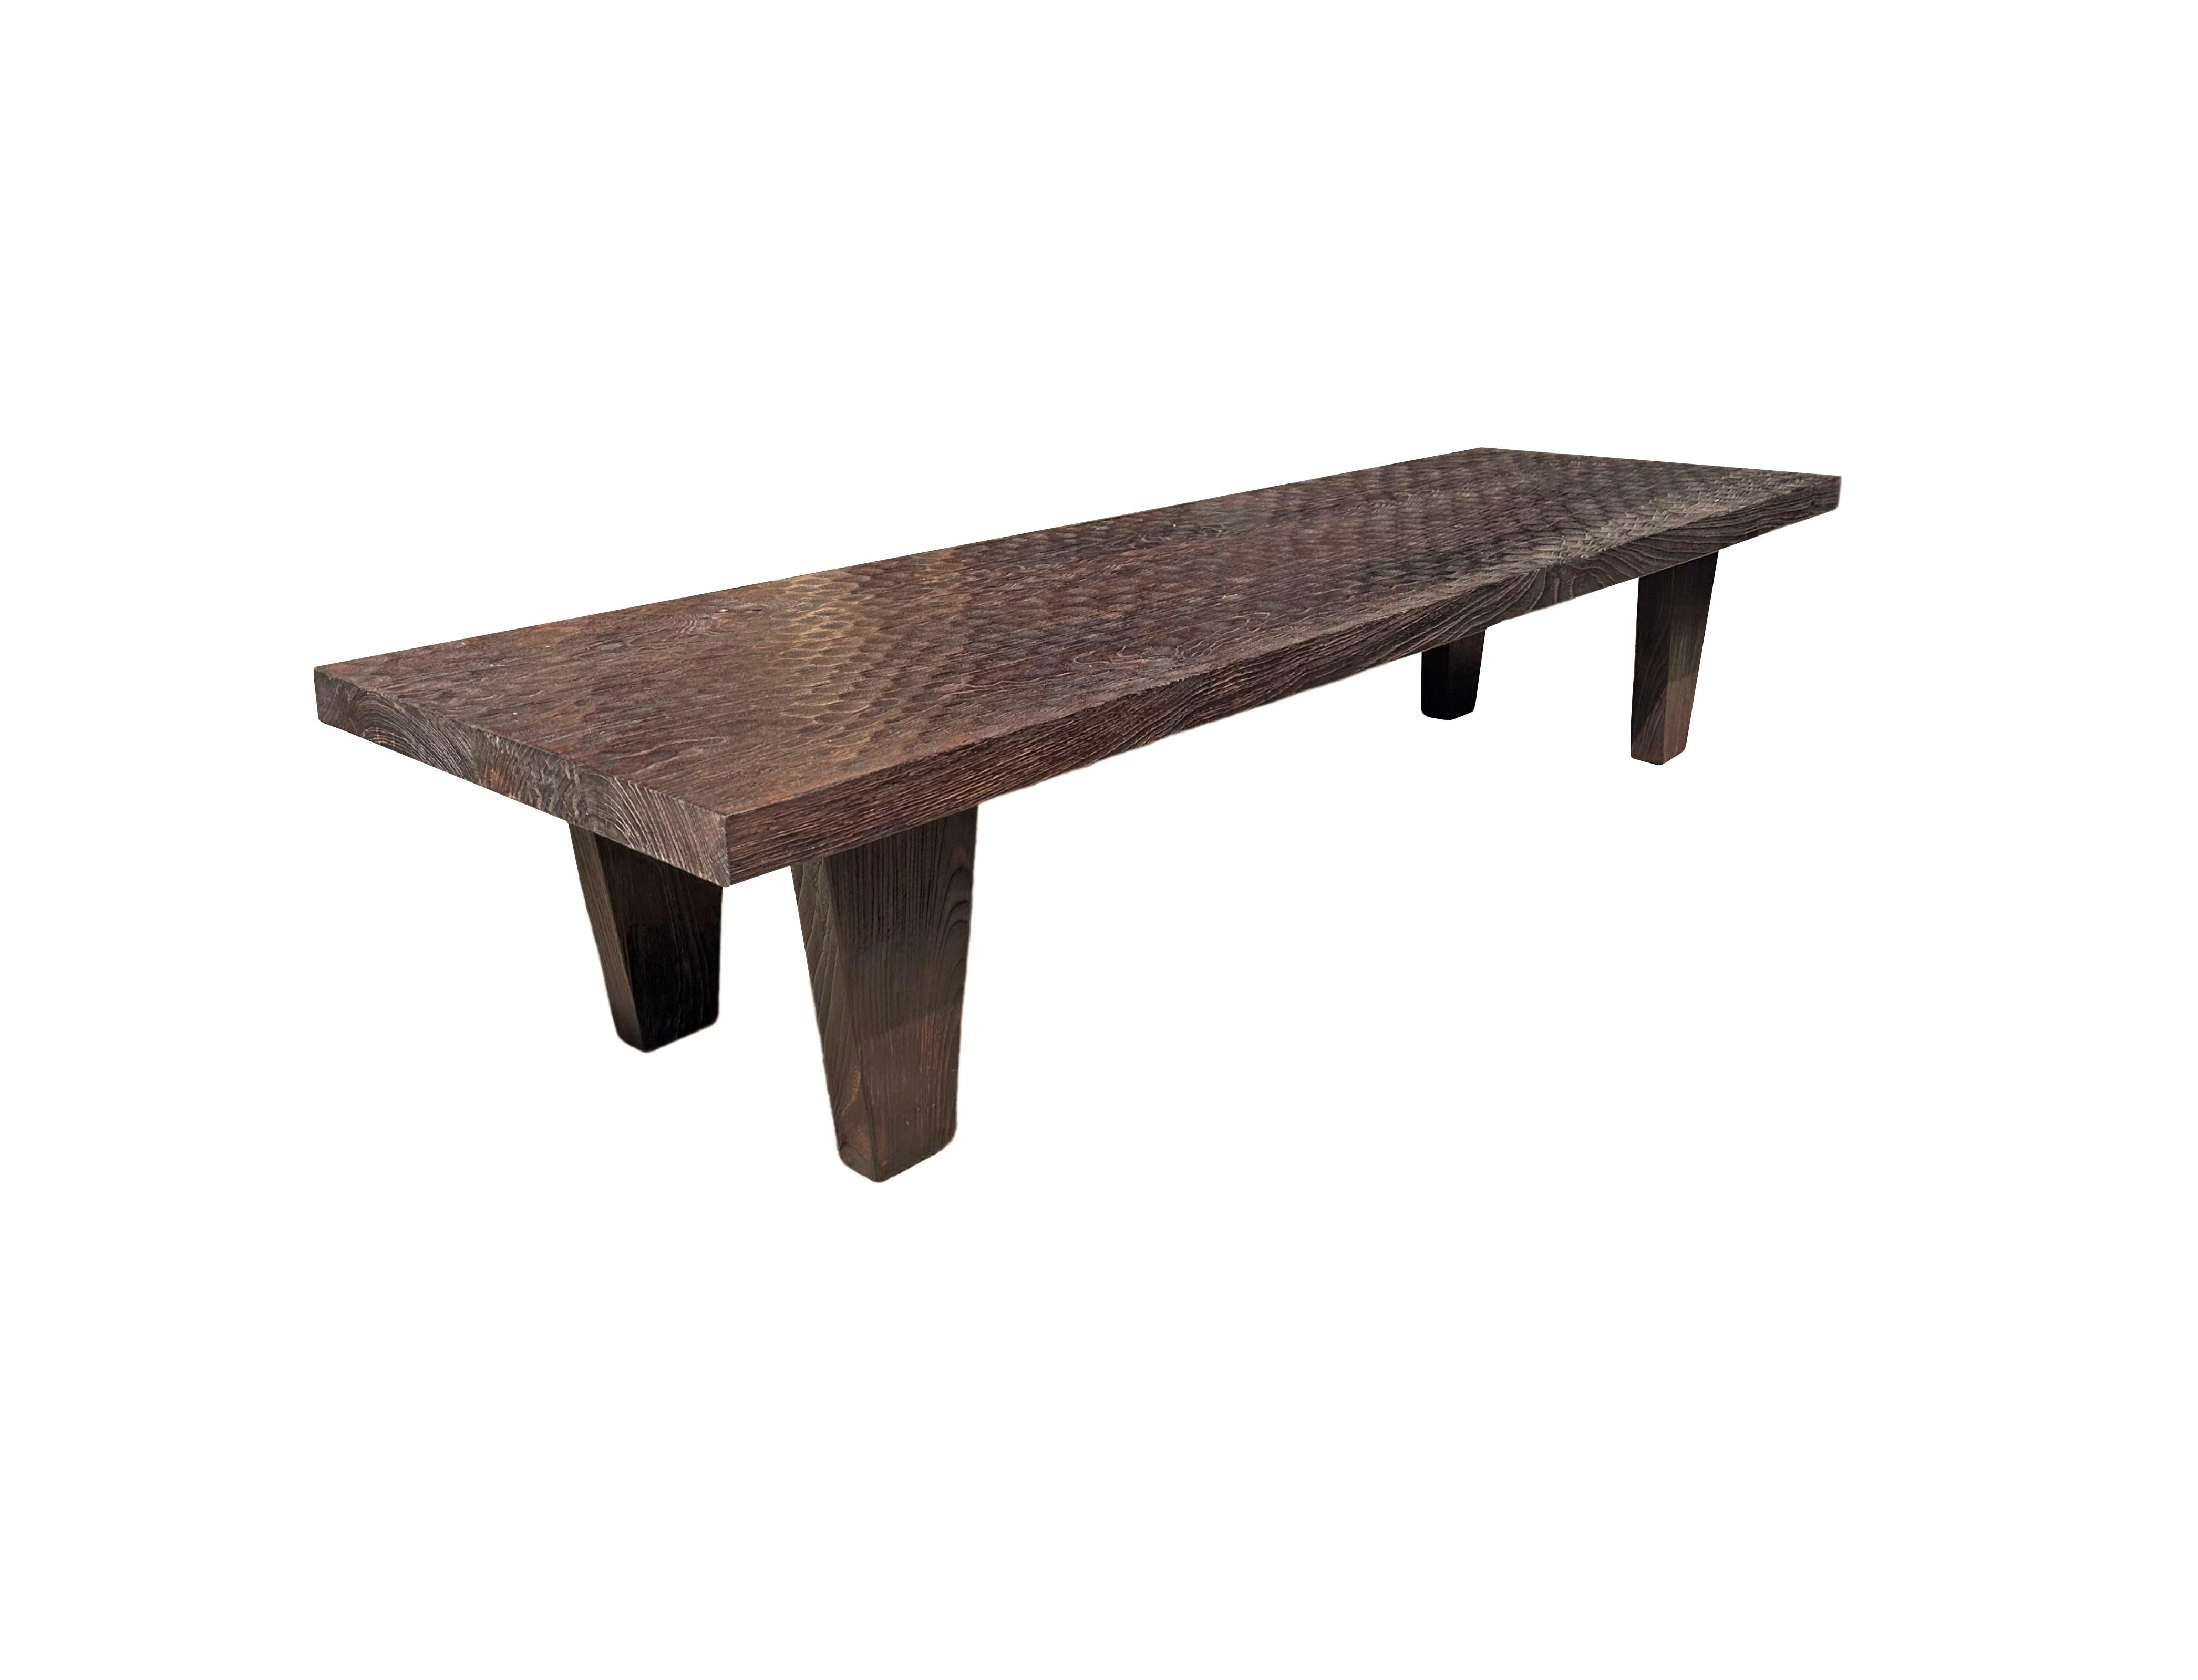 A wonderfully sculptural table crafted from suar wood. To achieve its pigment the wood was burnt numerous times and then finished with a clear coat. The mix of wood textures and shades adds to its charm. The table top was crafted from a single slab